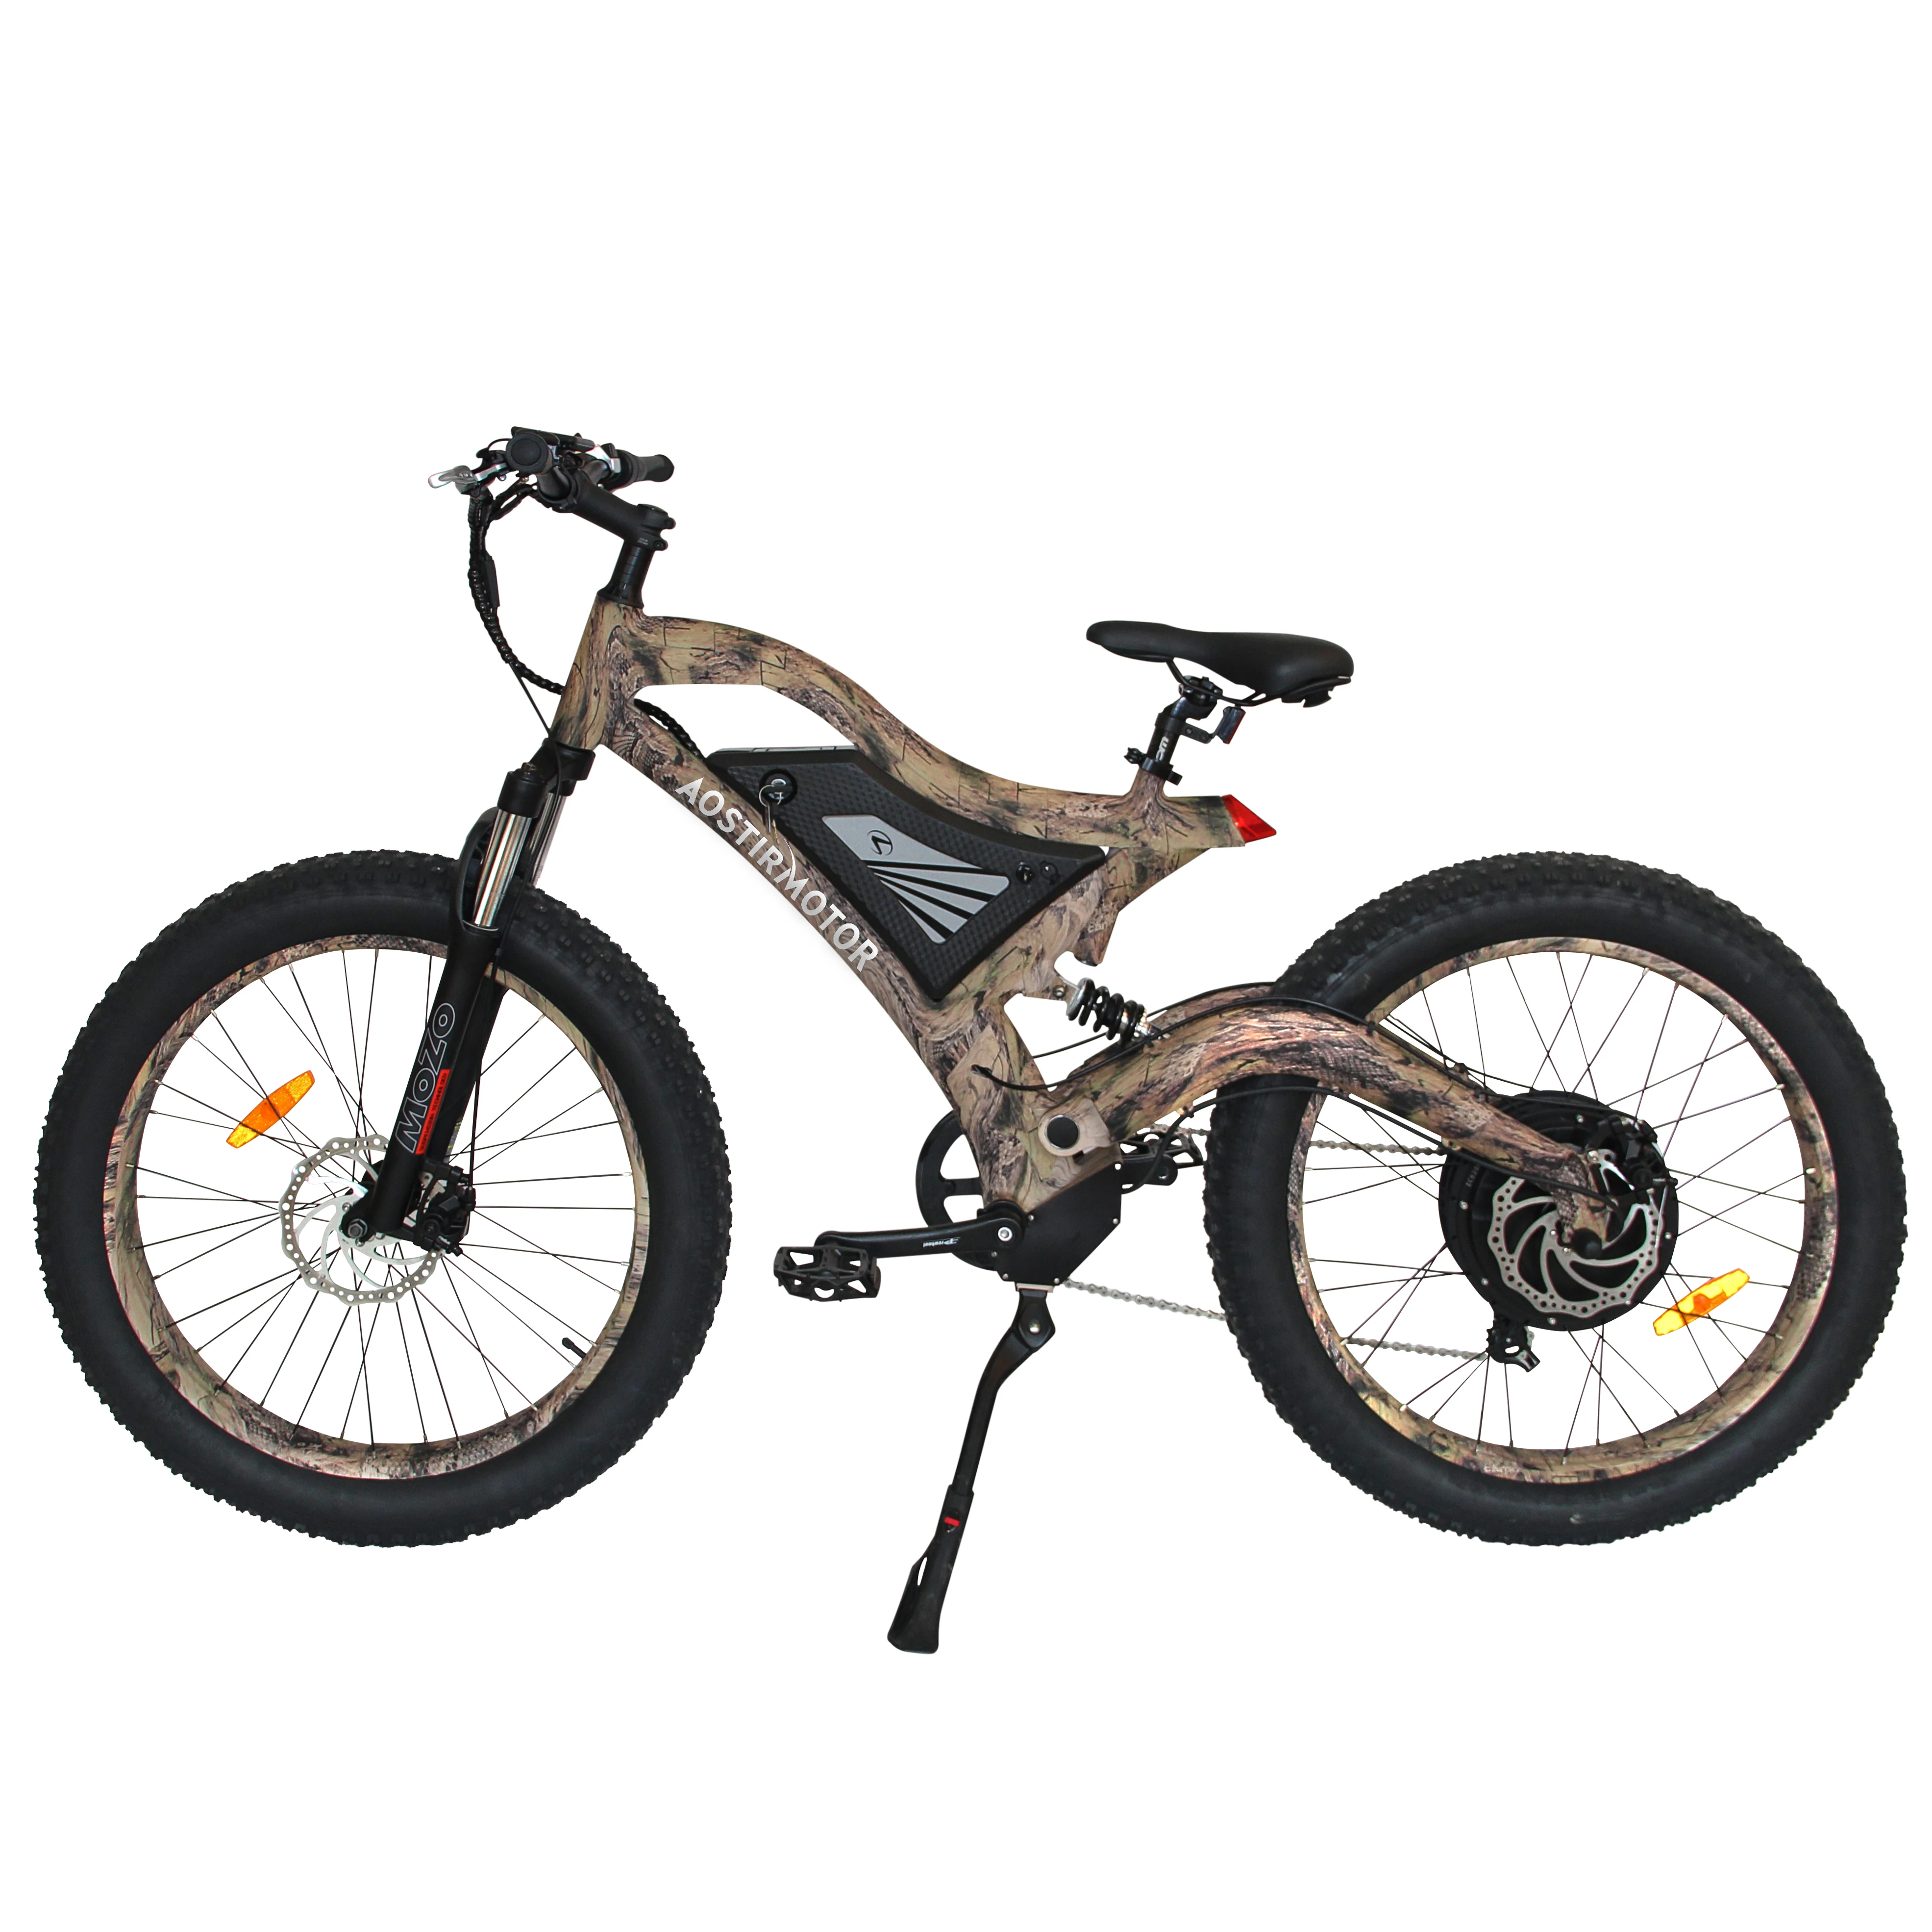 

Dual Suspension Fast 26 Inch 48V 1500W Fat Tire Electric MTB Cycle Bike FOR Sale